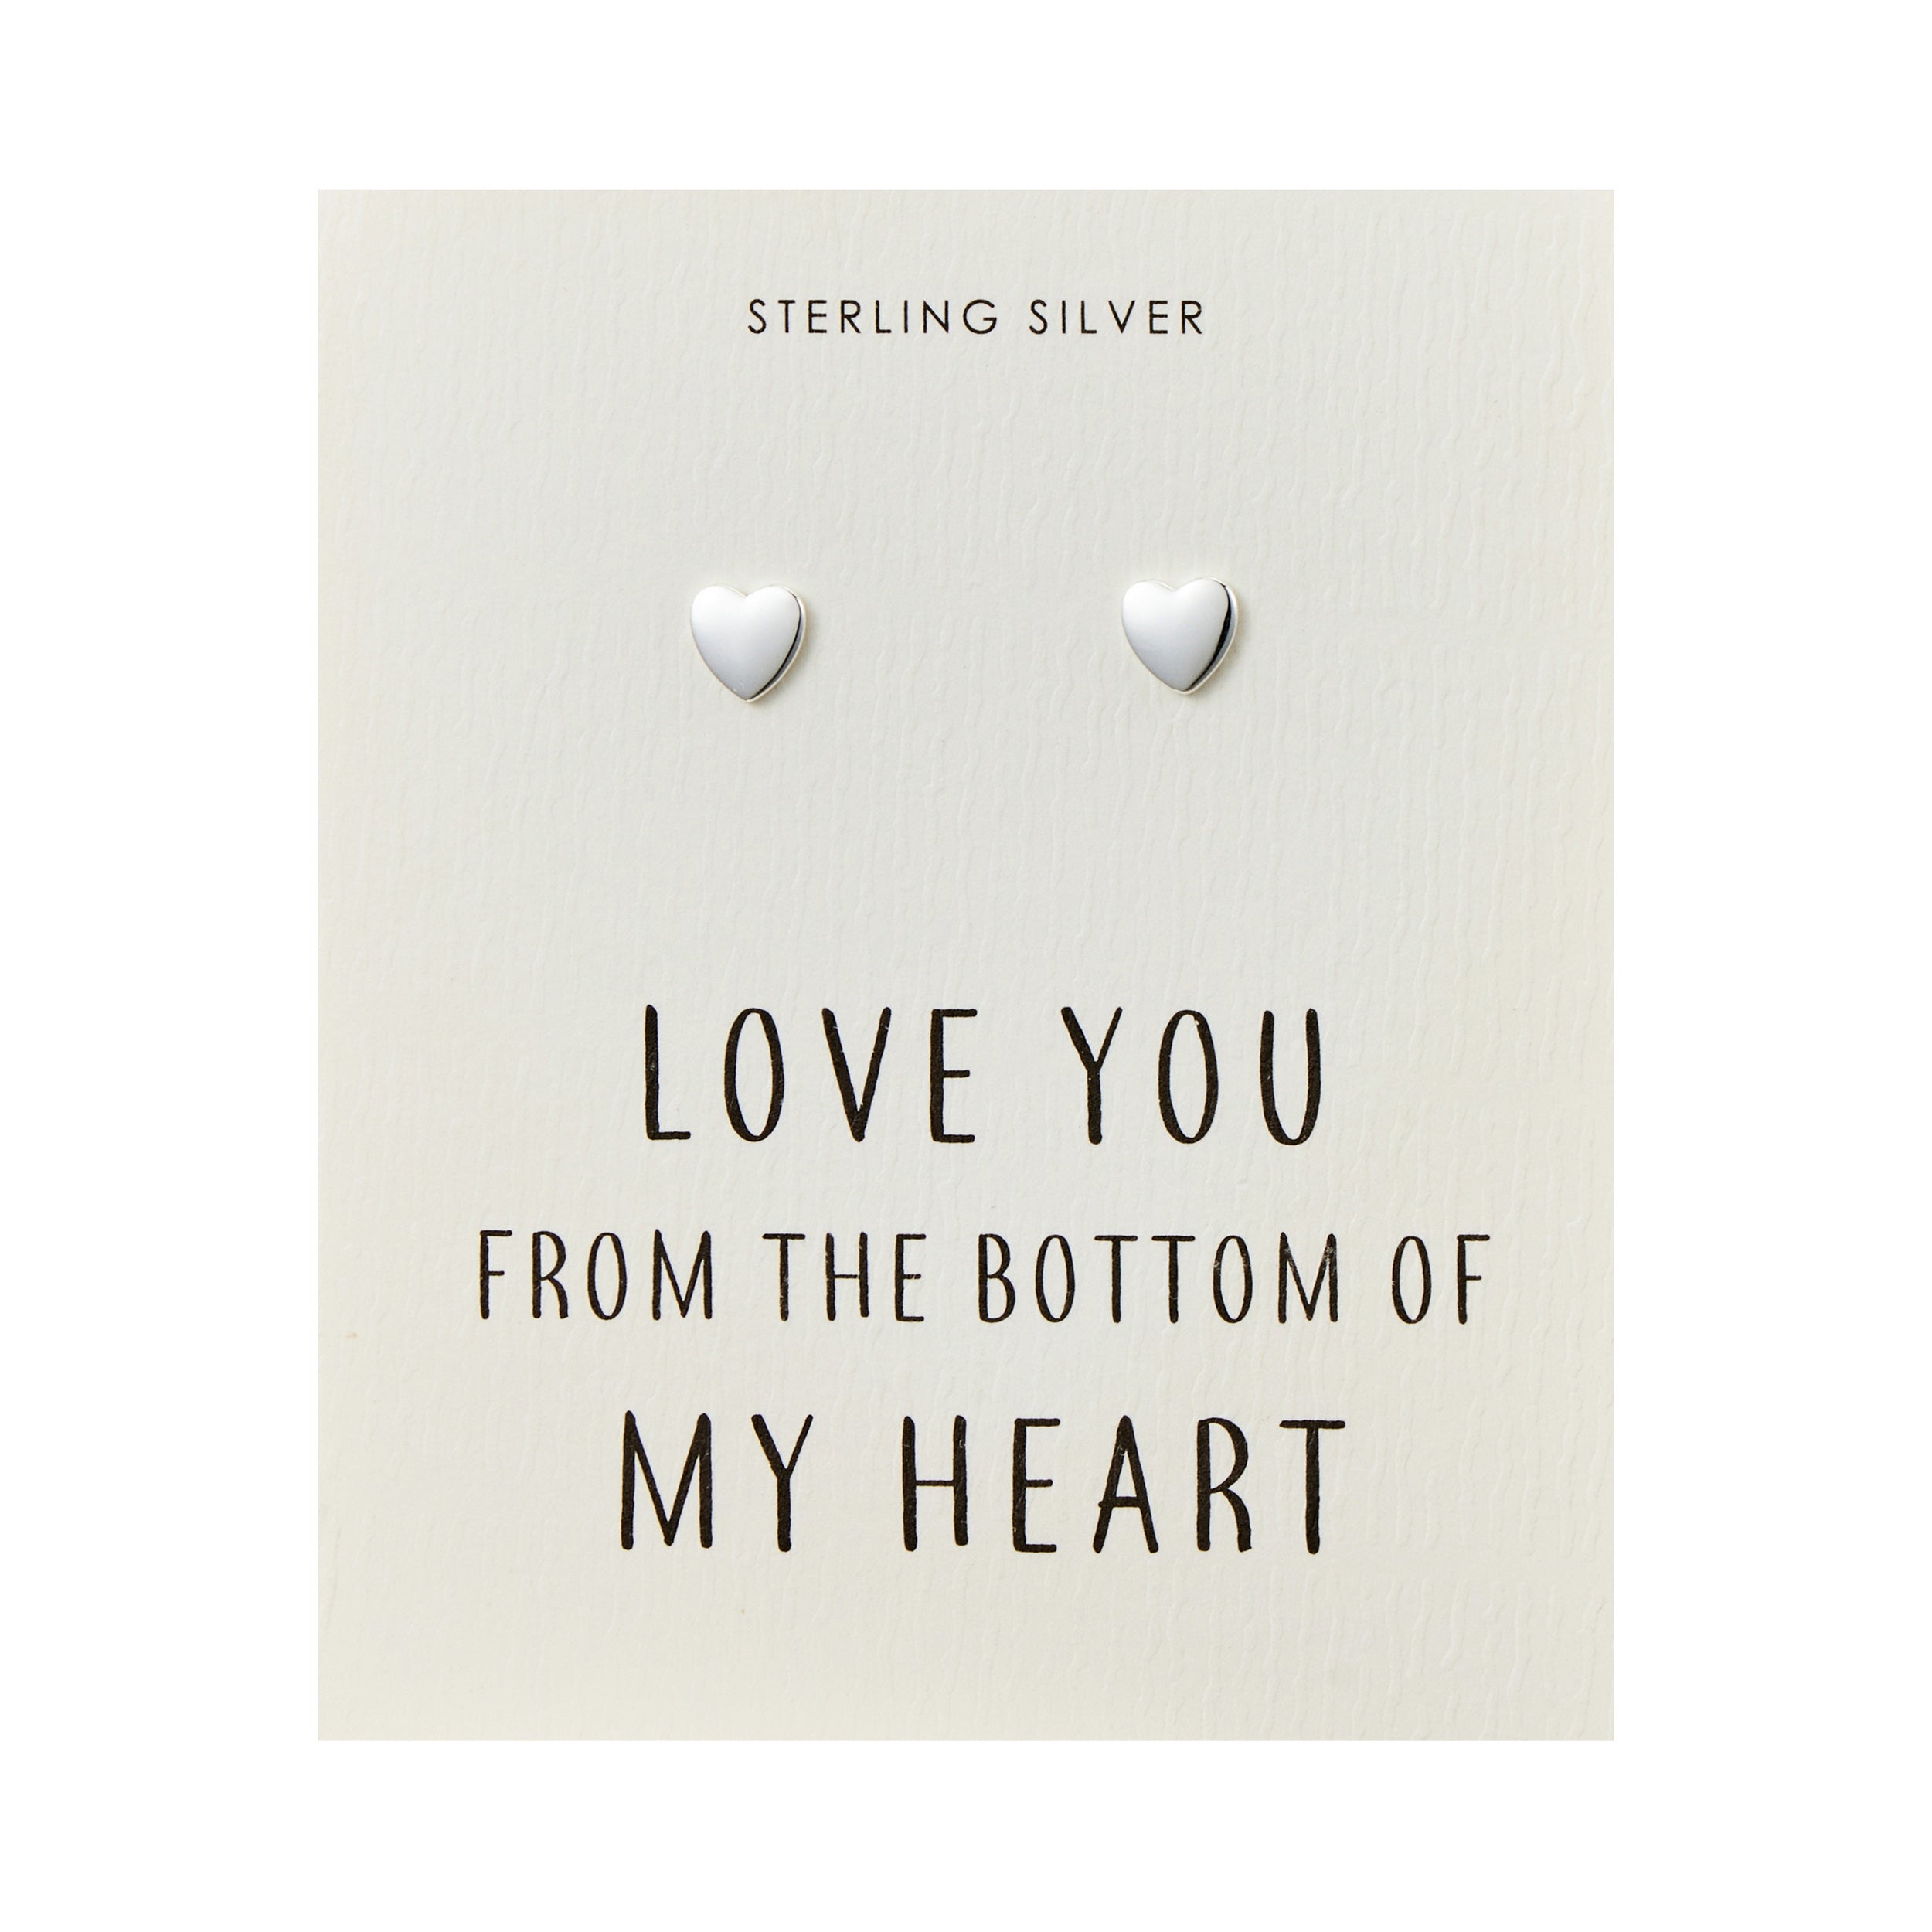 Sterling Silver Bottom of My Heart Earrings with Quote Card